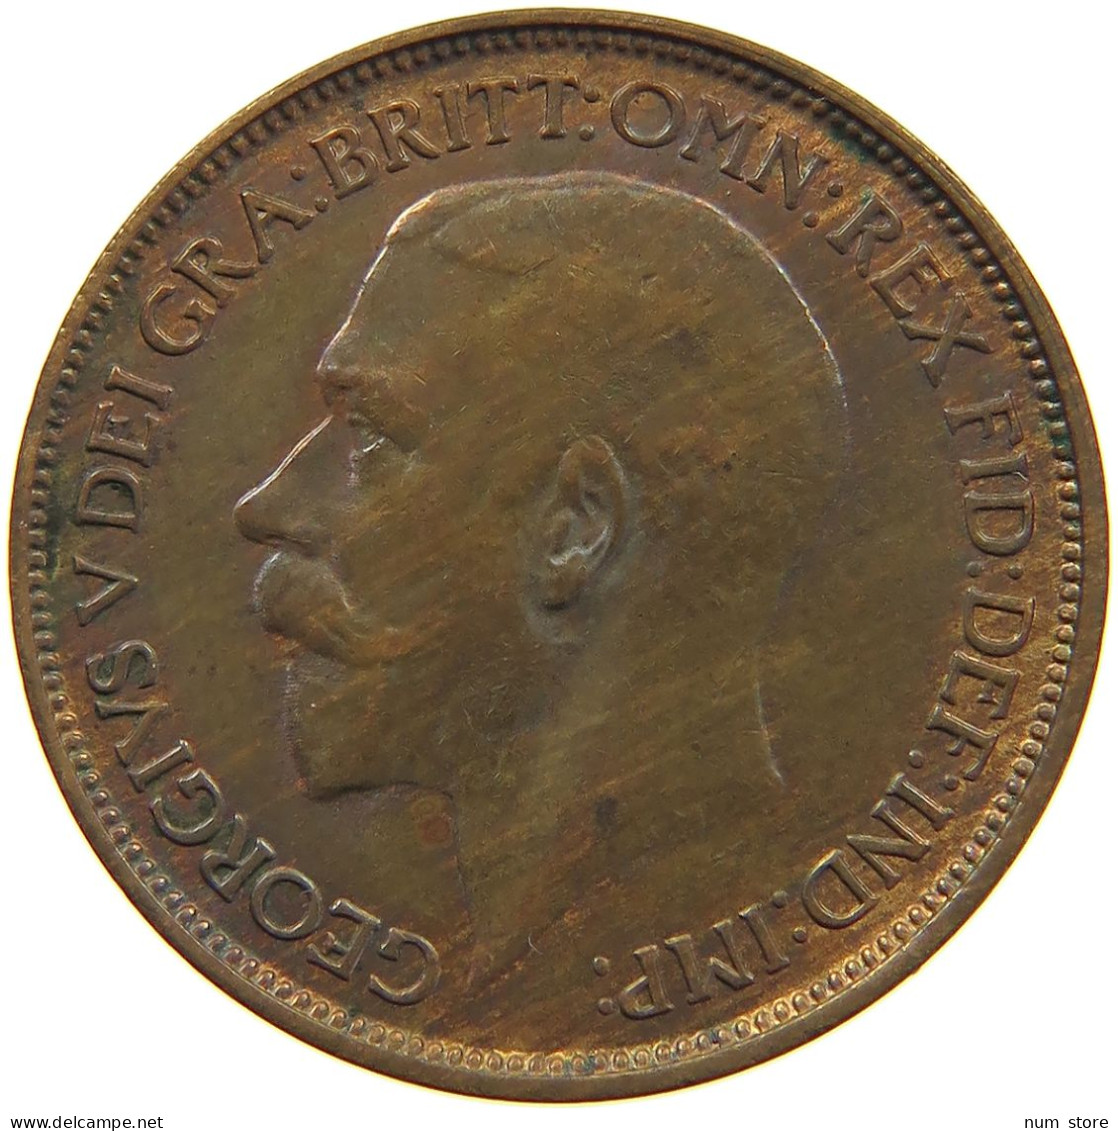 GREAT BRITAIN HALFPENNY 1913 George V. (1910-1936) #t002 0113 - C. 1/2 Penny